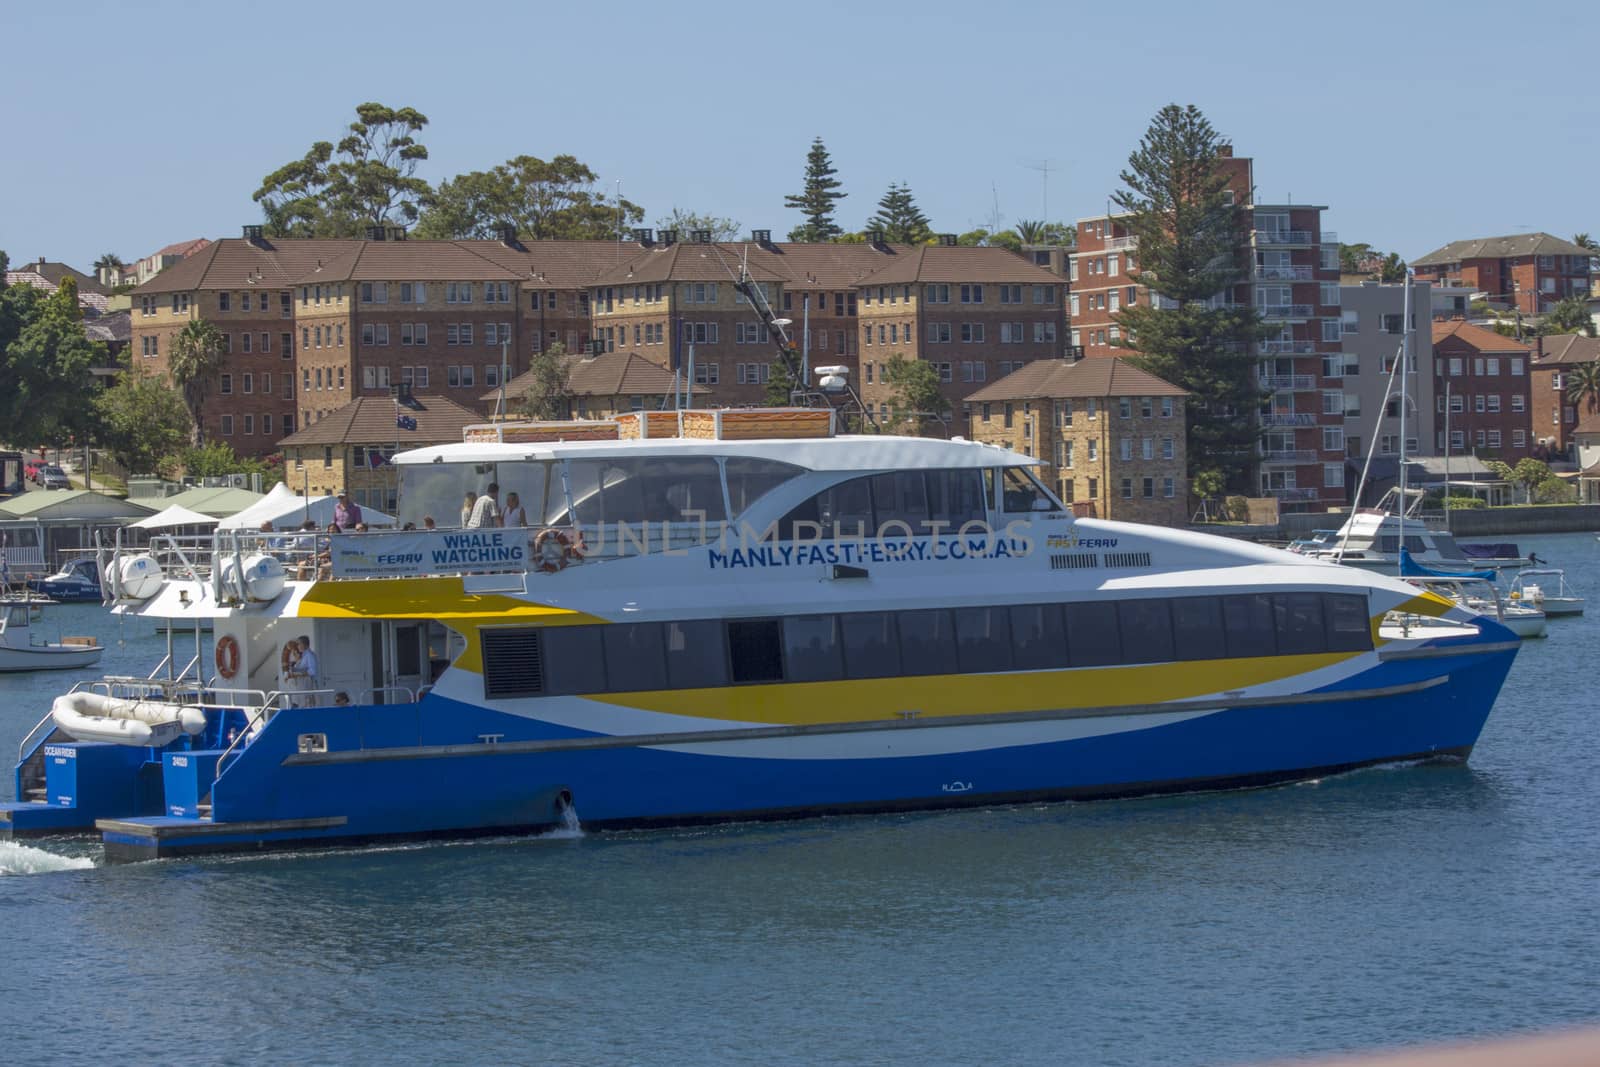 MANLY, AUSTRALIA-DECEMBER 19TH 2013: The Manly Fast Ferry leaving Manly harbour for Circular Quay. The fast ferry competes the journey in 15 minutes.